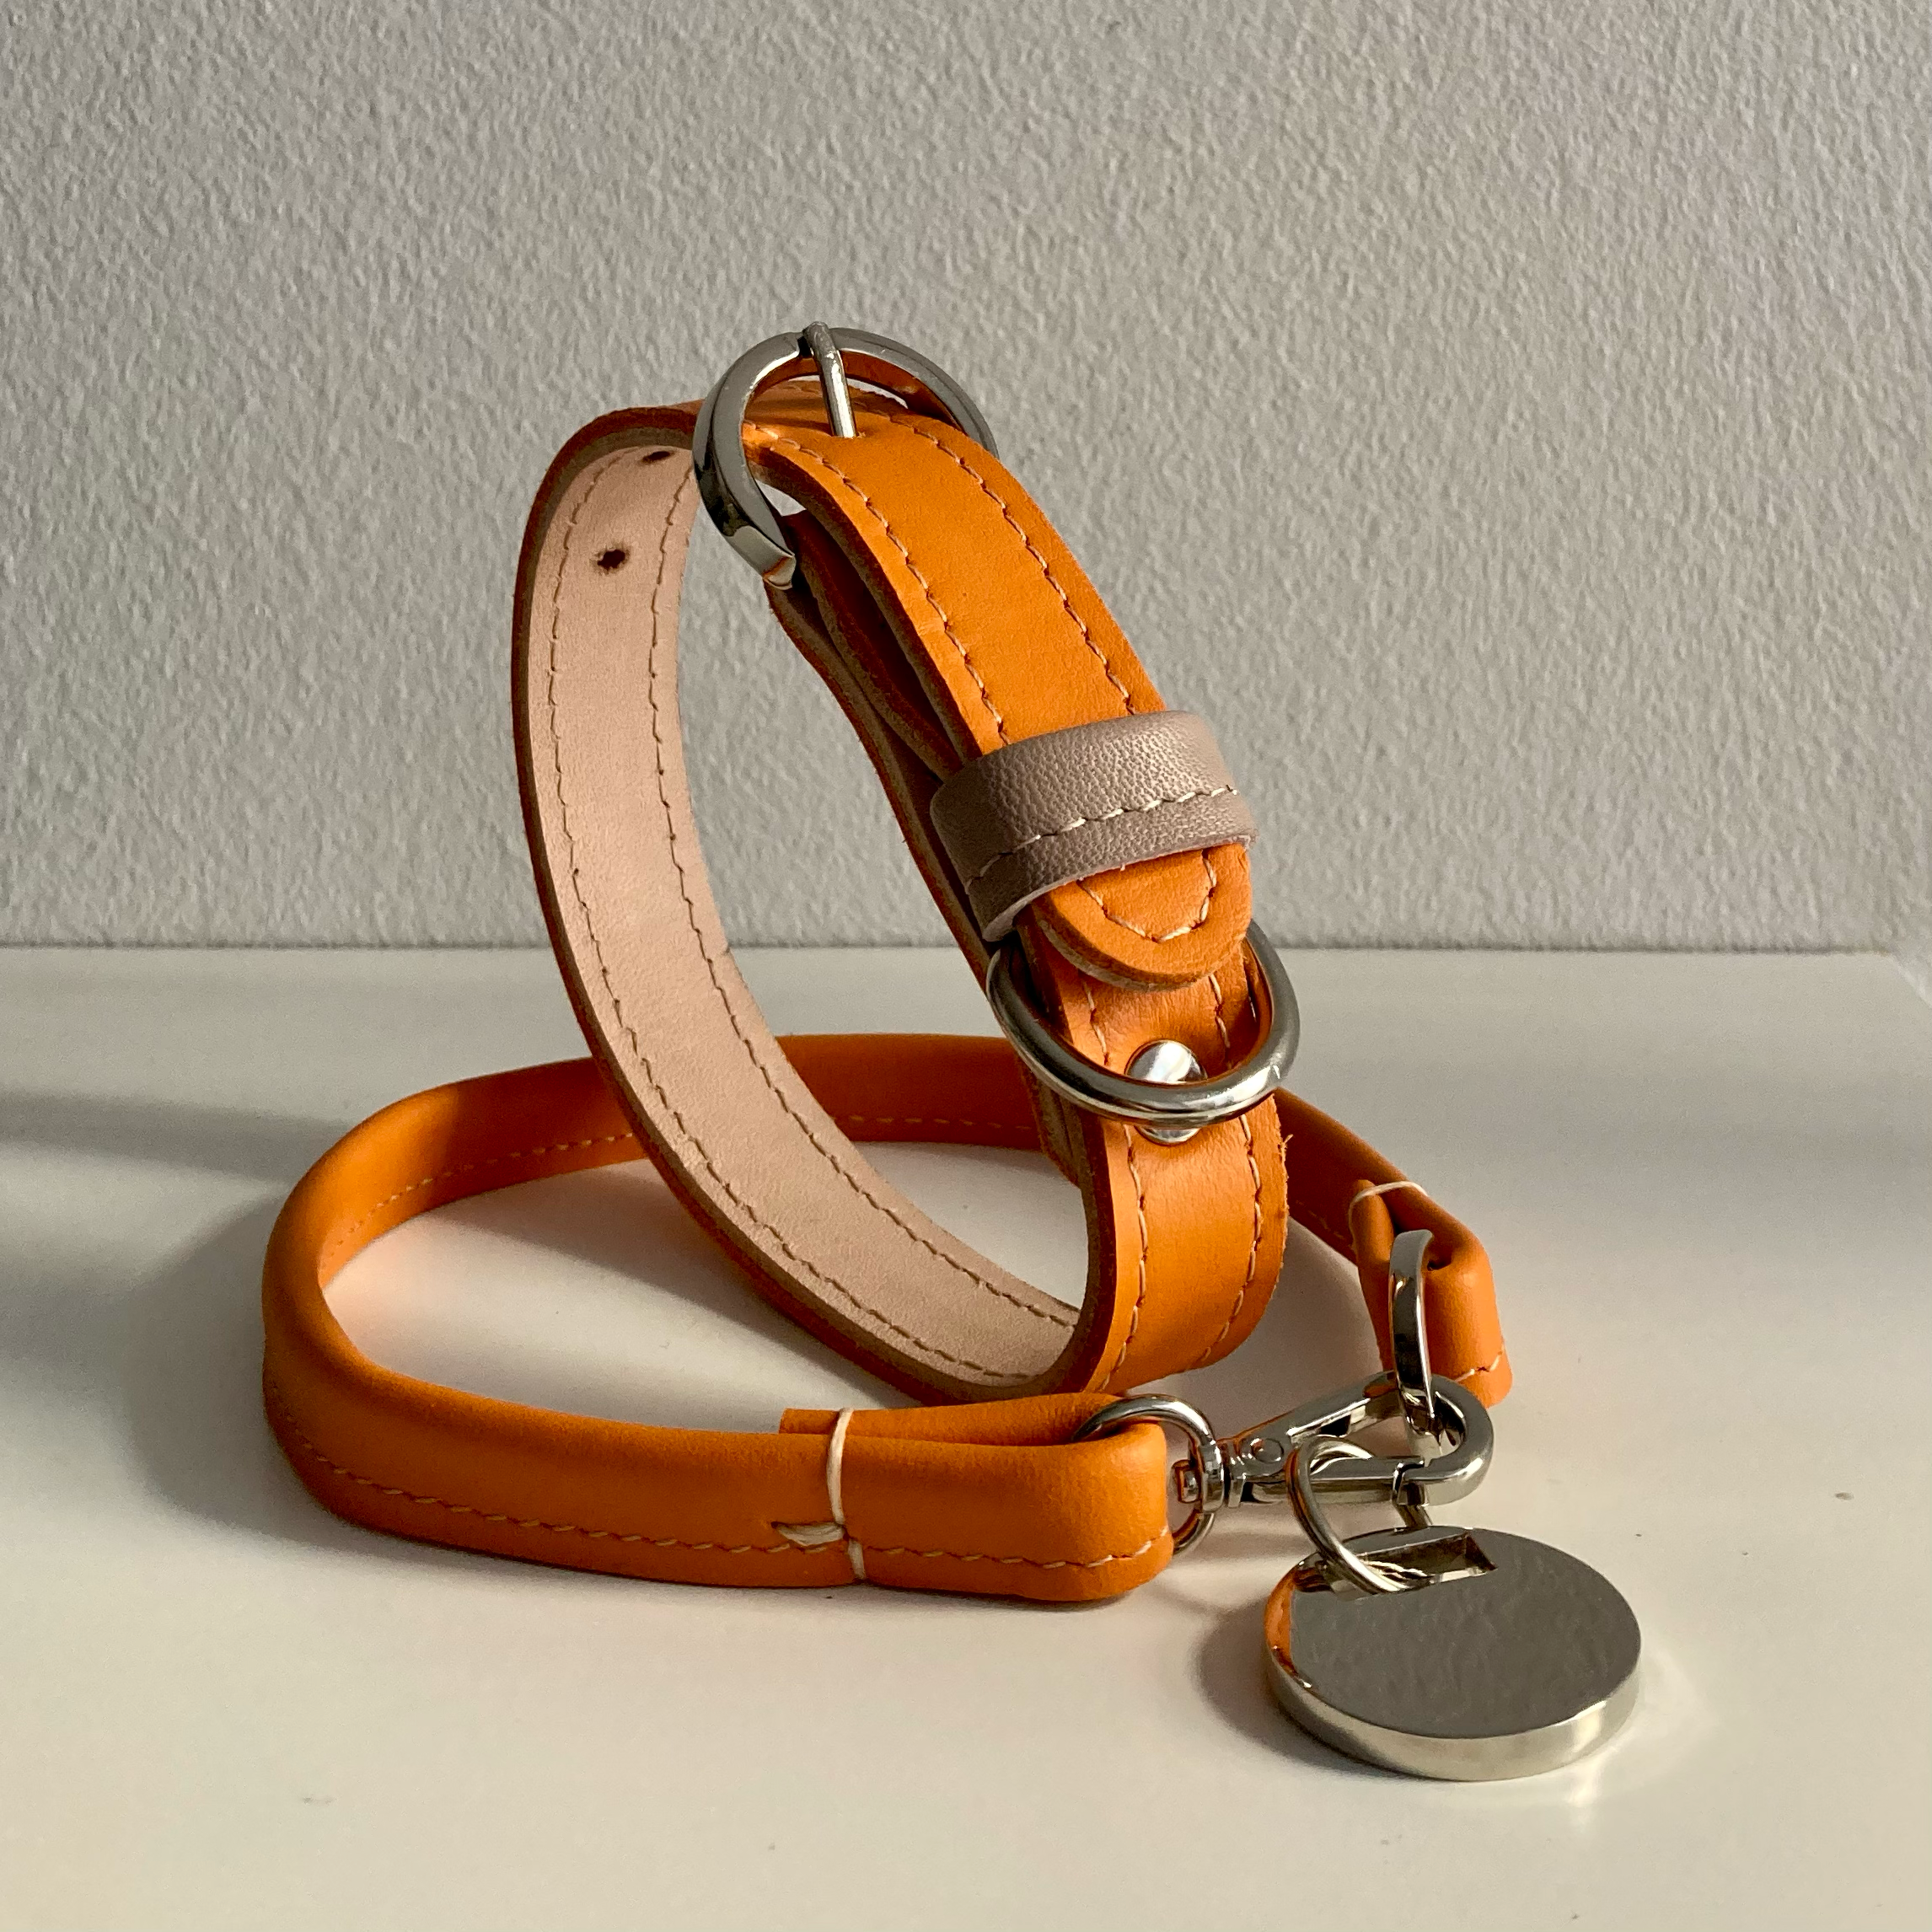 Basic Collar for dogs with shorter neck